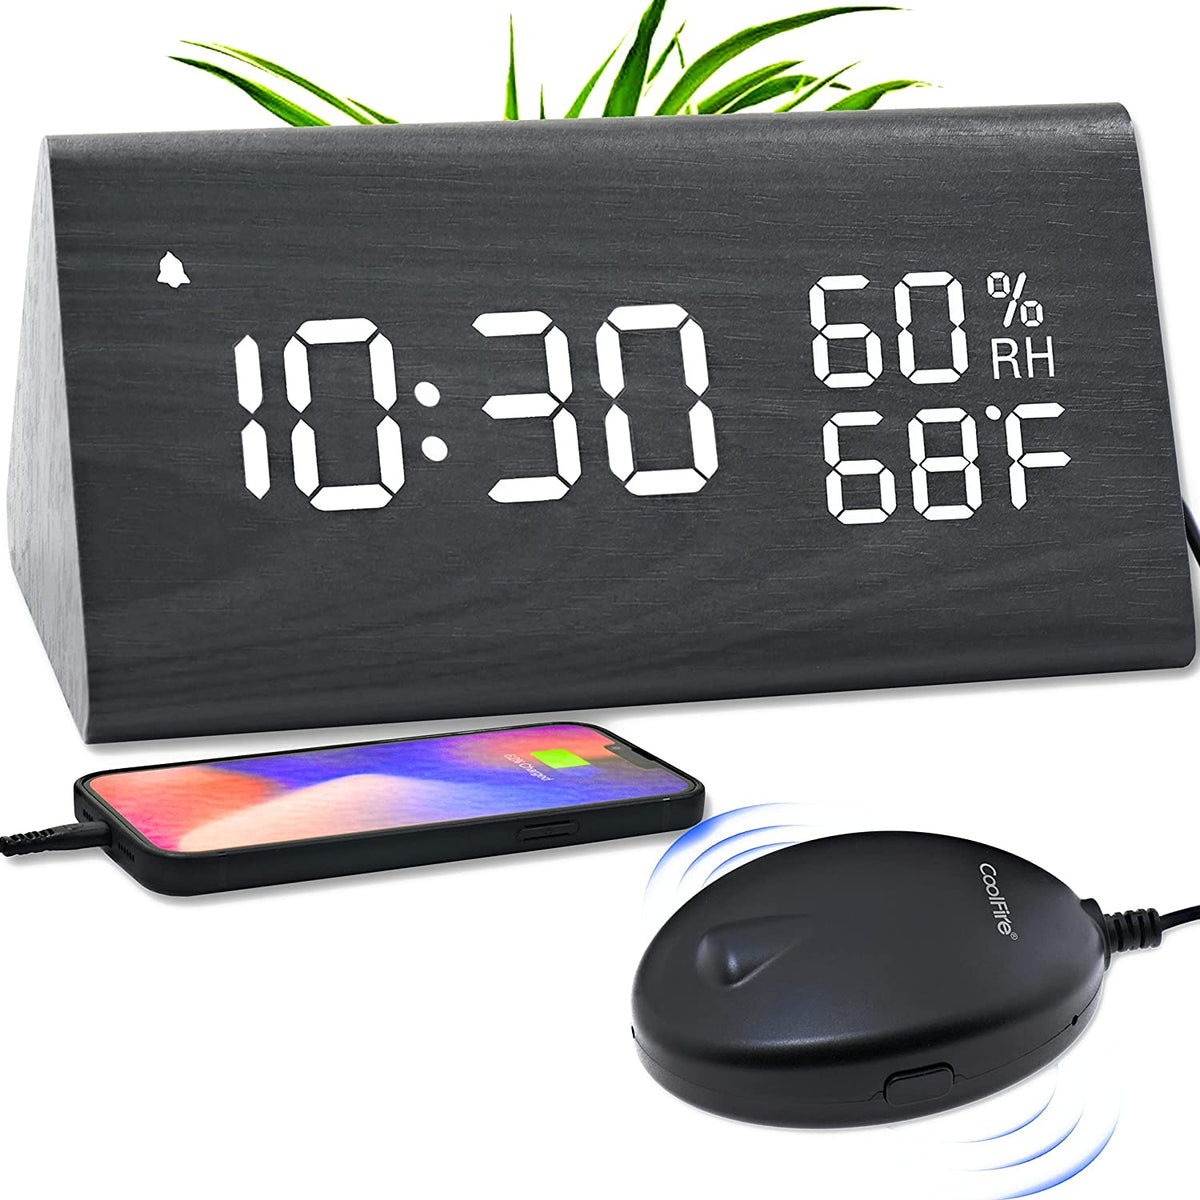 Coolfire Wooden Digital Alarm Clock with Vibrating Bed Shaker